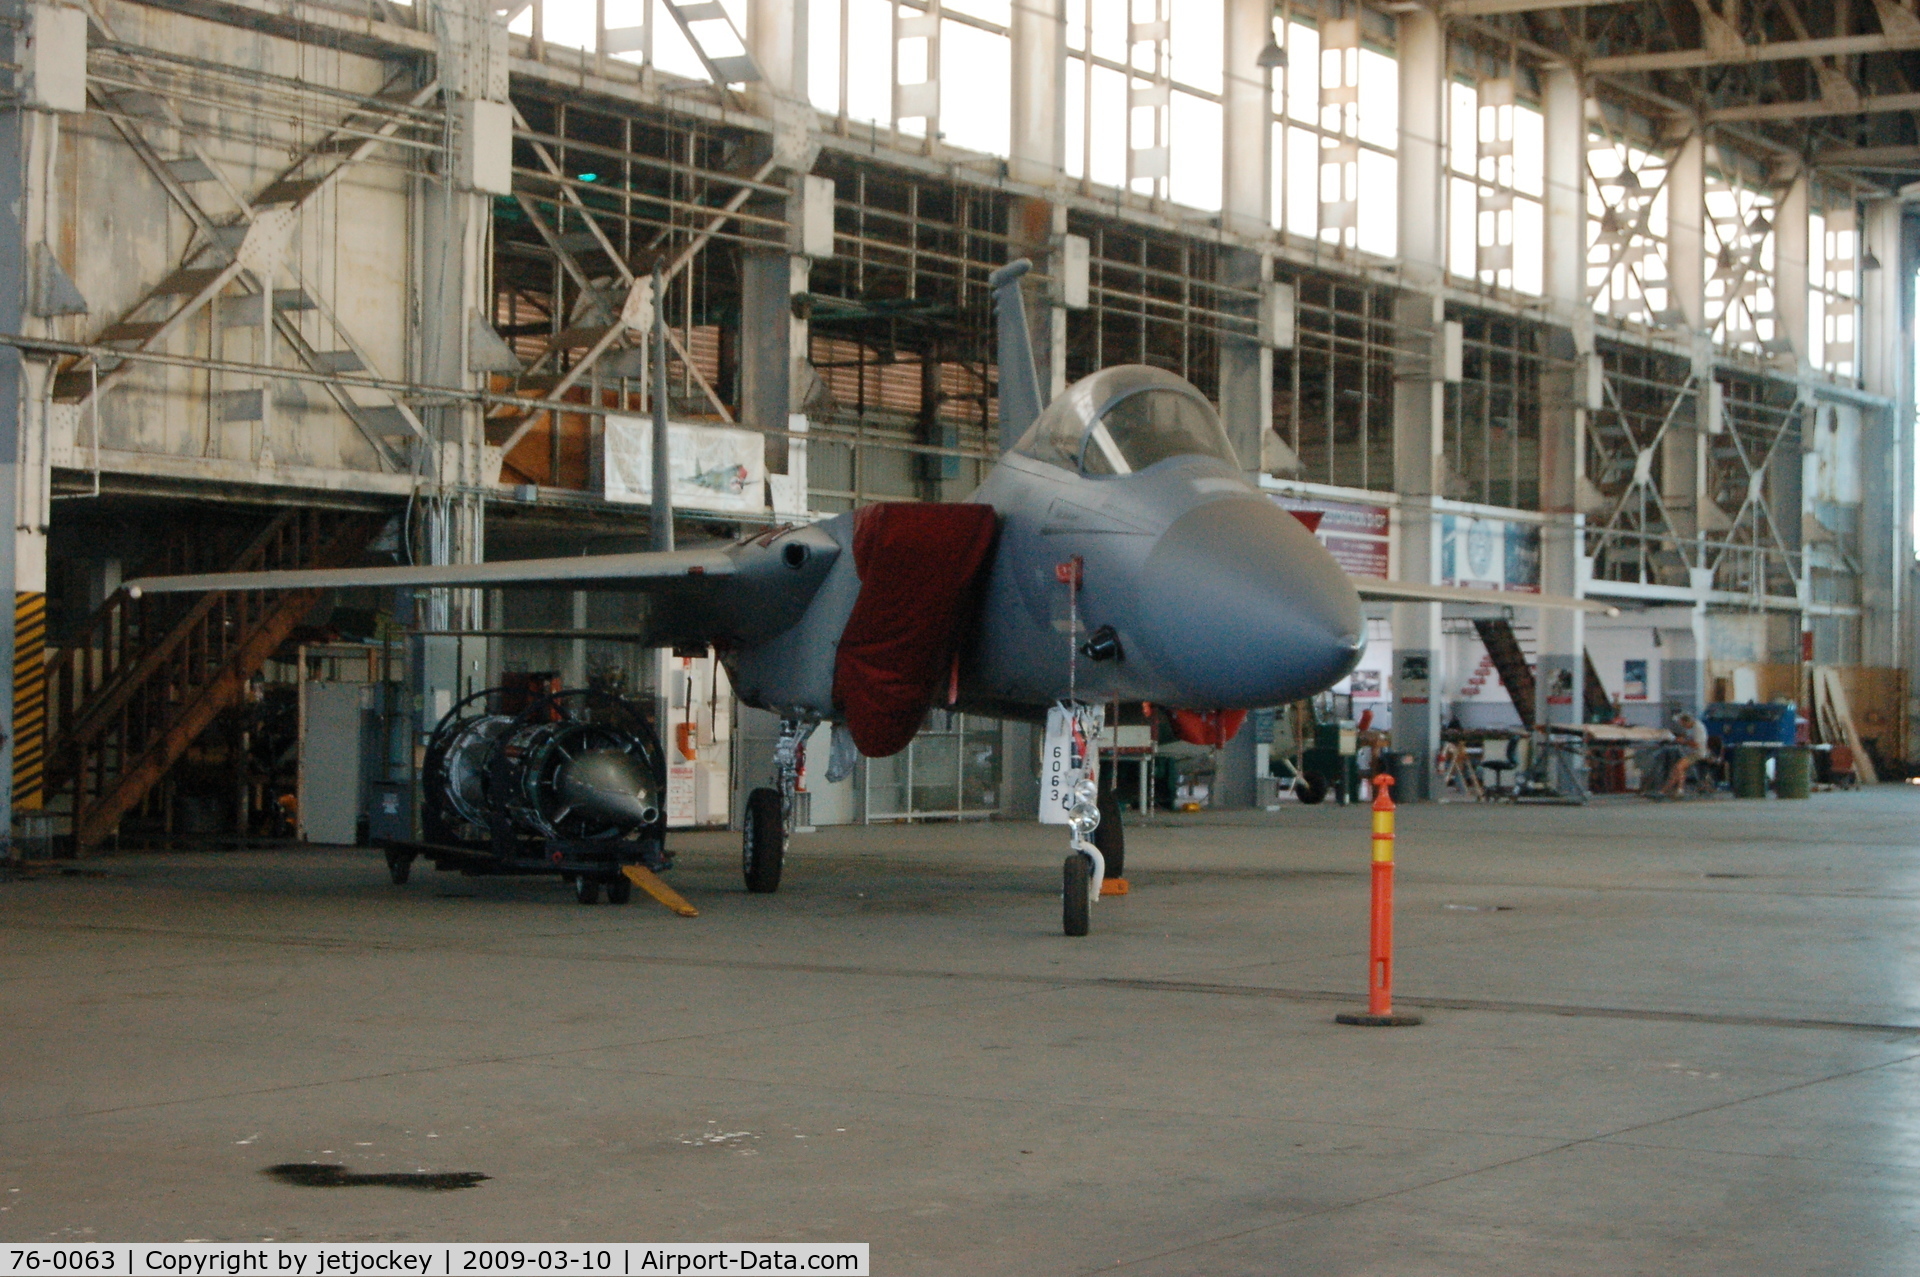 76-0063, 1976 McDonnell Douglas F-15A Eagle C/N 0249/A215, F15A Eagle under restoration in hanger 67 (with the Tomcat)